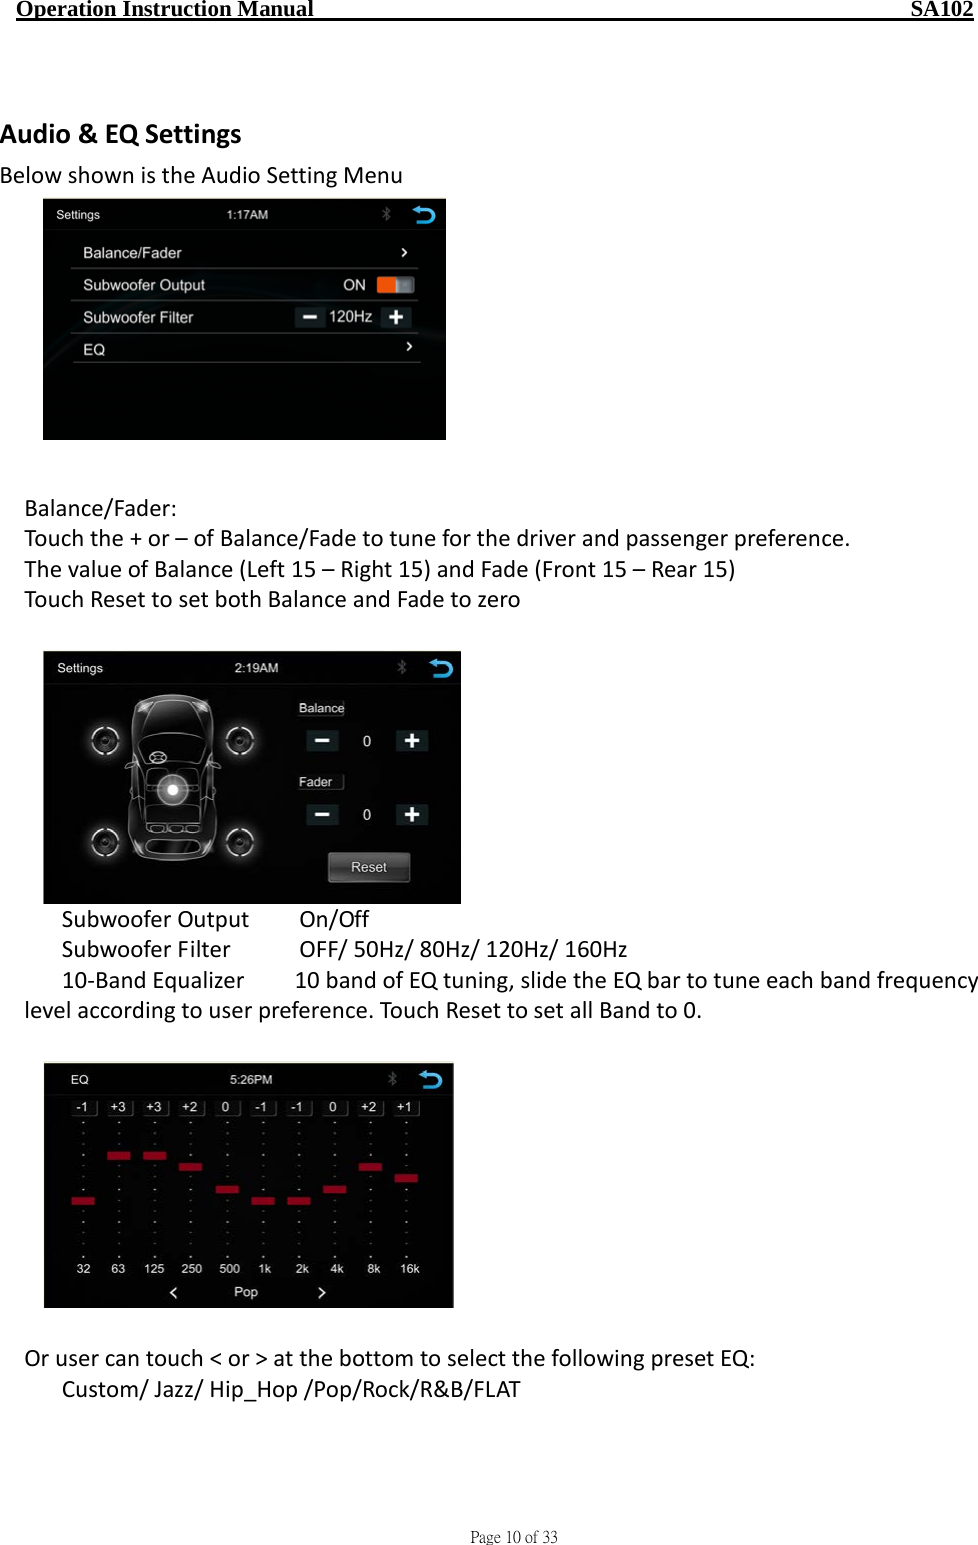                                     Page 10 of 33  Operation Instruction Manual                                                    SA102  Audio &amp; EQ Settings Below shown is the Audio Setting Menu                                                 Balance/Fader:   Touch the + or – of Balance/Fade to tune for the driver and passenger preference. The value of Balance (Left 15 – Right 15) and Fade (Front 15 – Rear 15) Touch Reset to set both Balance and Fade to zero      Subwoofer Output  On/Off    Subwoofer Filter       OFF/ 50Hz/ 80Hz/ 120Hz/ 160Hz 10-Band Equalizer    10 band of EQ tuning, slide the EQ bar to tune each band frequency level according to user preference. Touch Reset to set all Band to 0.    Or user can touch &lt; or &gt; at the bottom to select the following preset EQ:   Custom/ Jazz/ Hip_Hop /Pop/Rock/R&amp;B/FLAT 